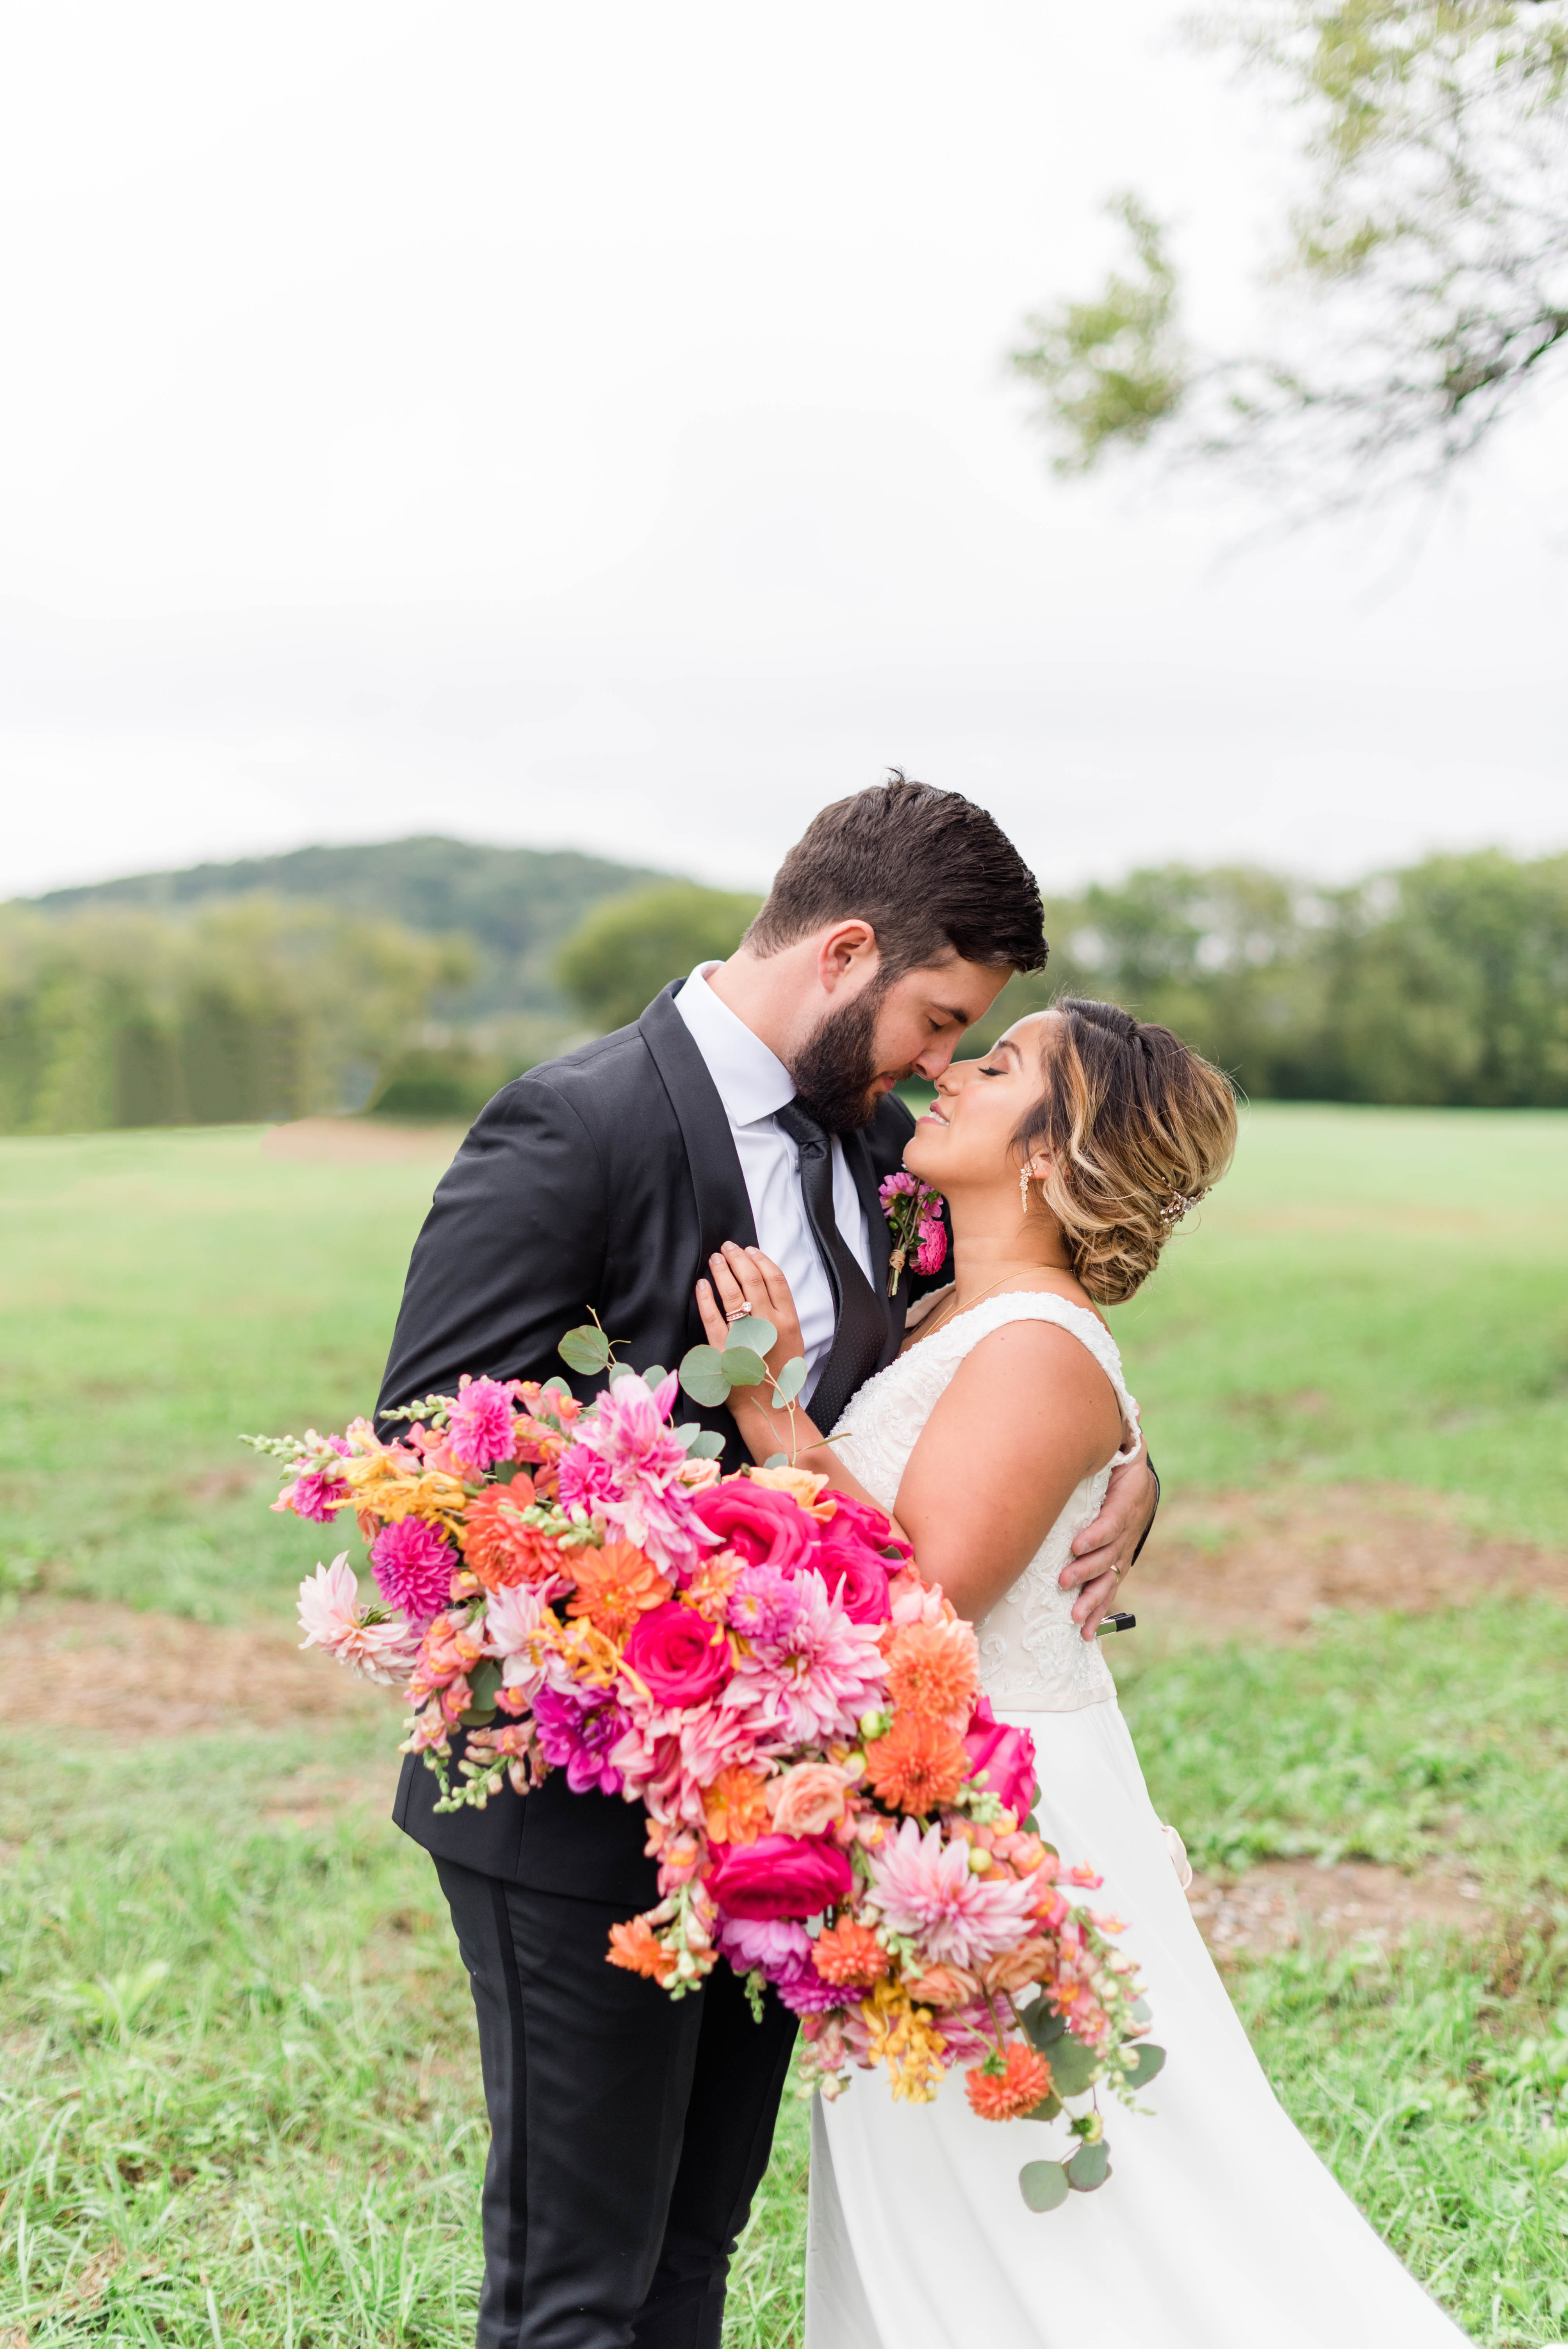 Colorful Fall Styled Shoot At The Green Door Gourmet